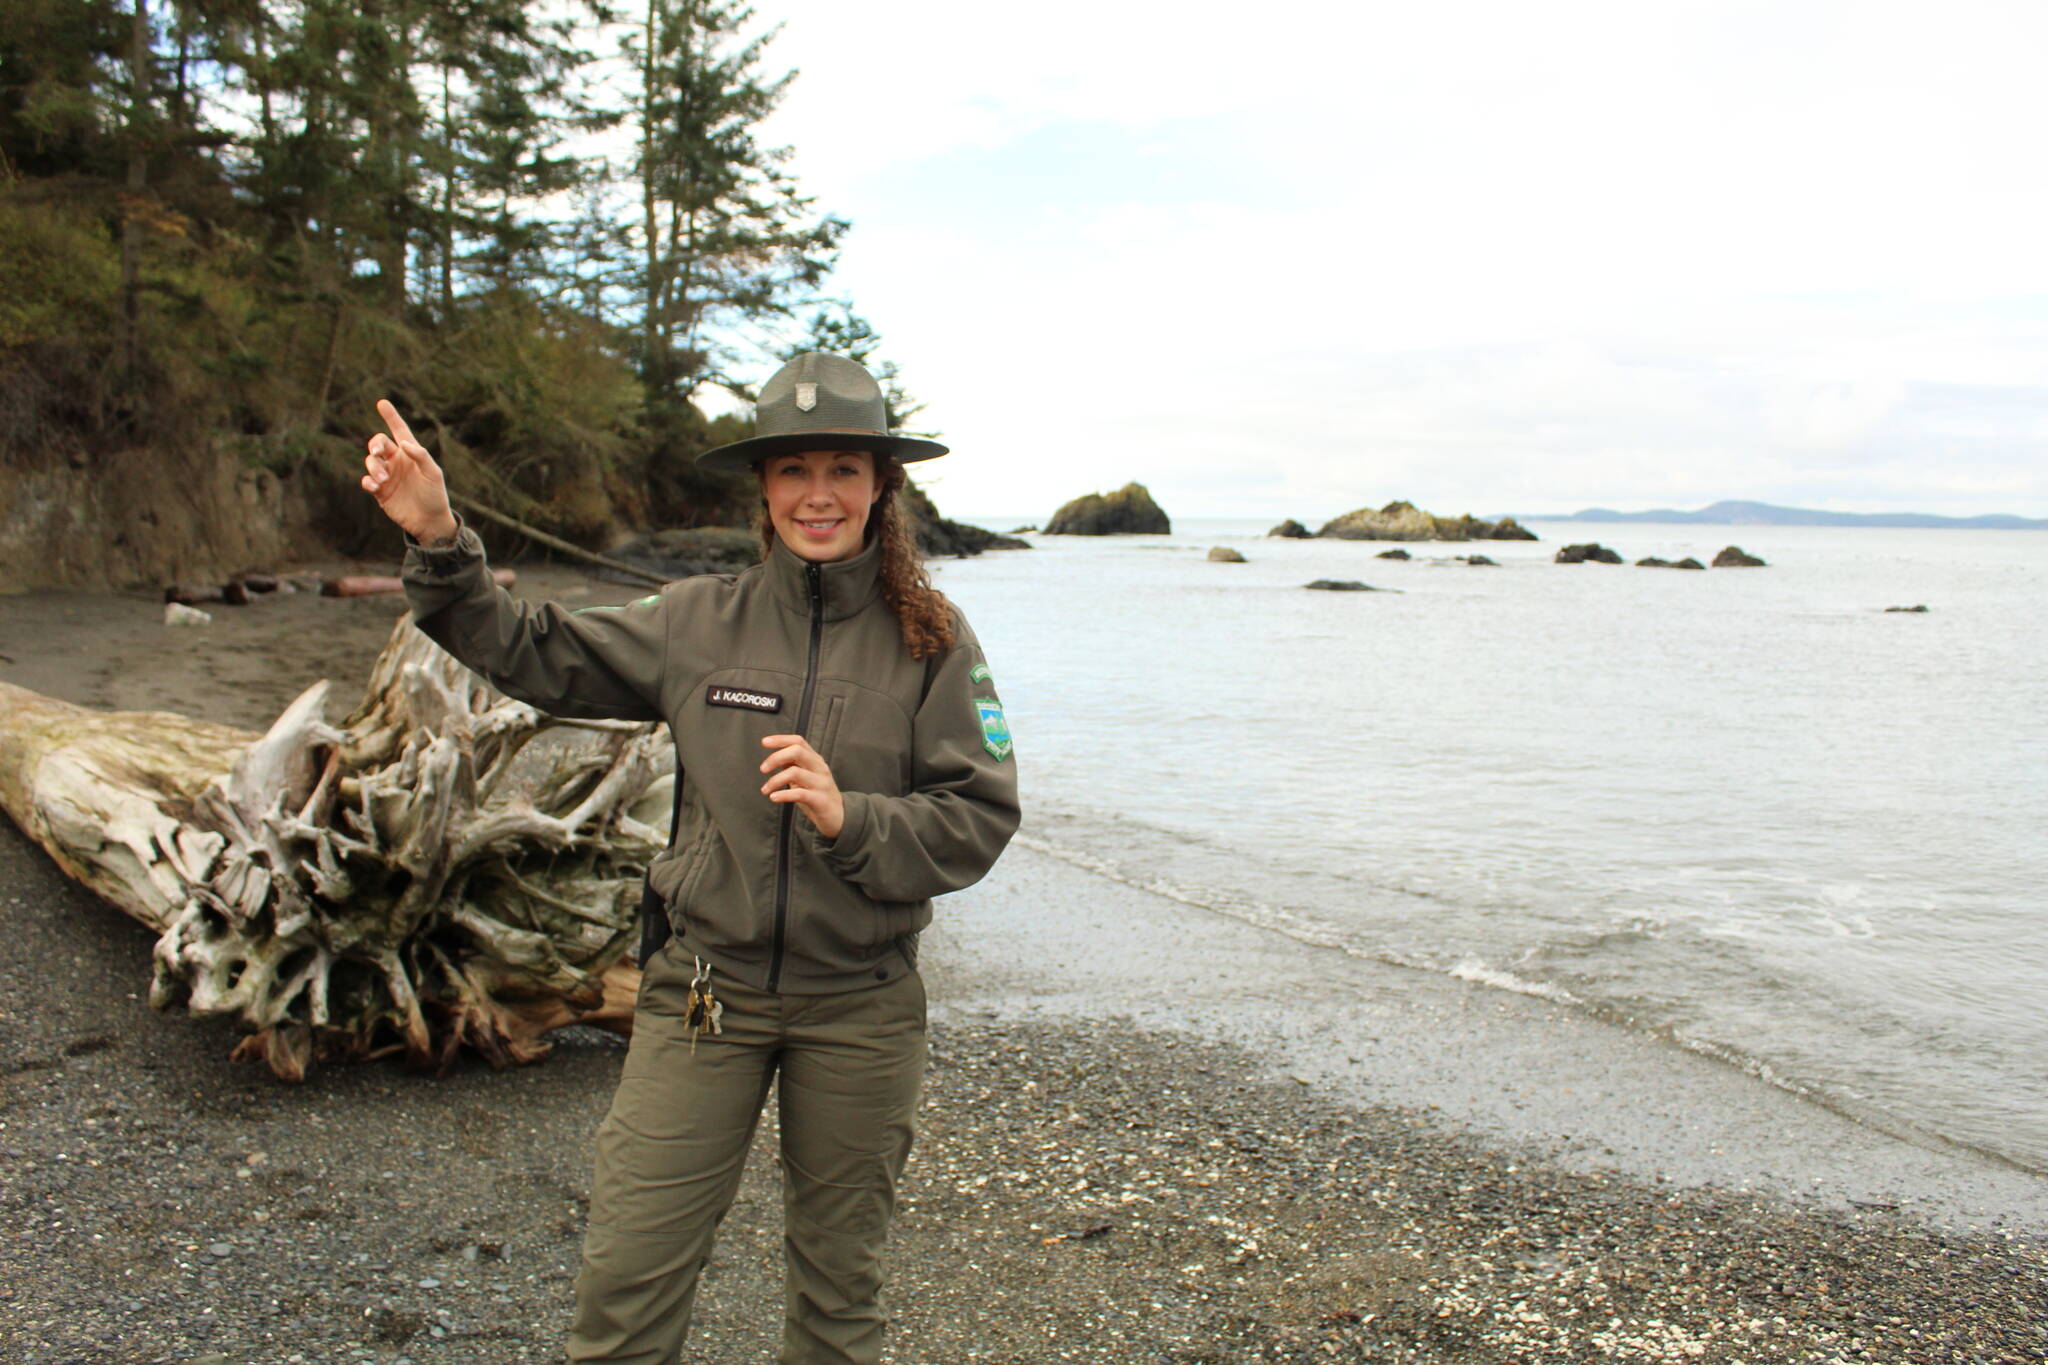 Photo by Karina Andrew/Whidbey News-Times
Deception Pass interpretive specialist Joy Kacoroski is one of the park rangers who helped deliver and produce live virtual field trips this spring.